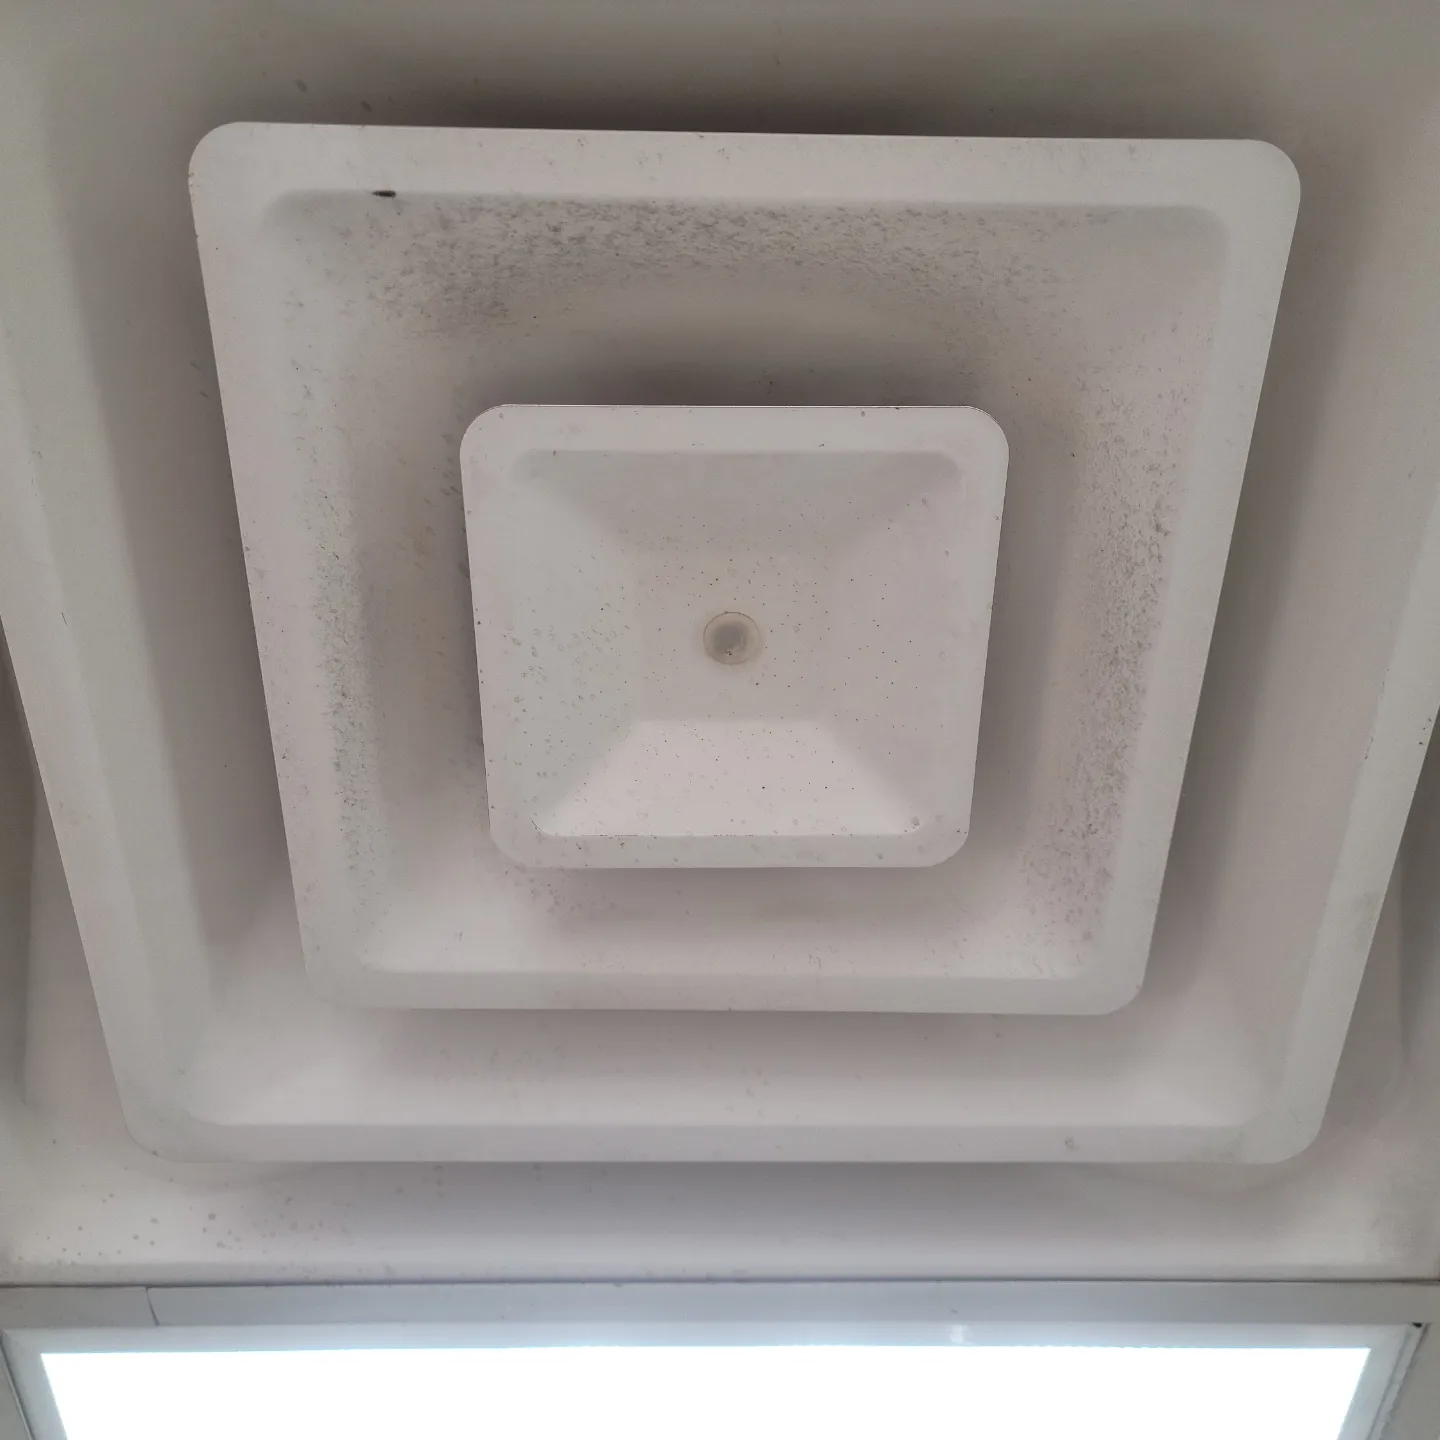 A Dirt Ridden Ceiling in White Color